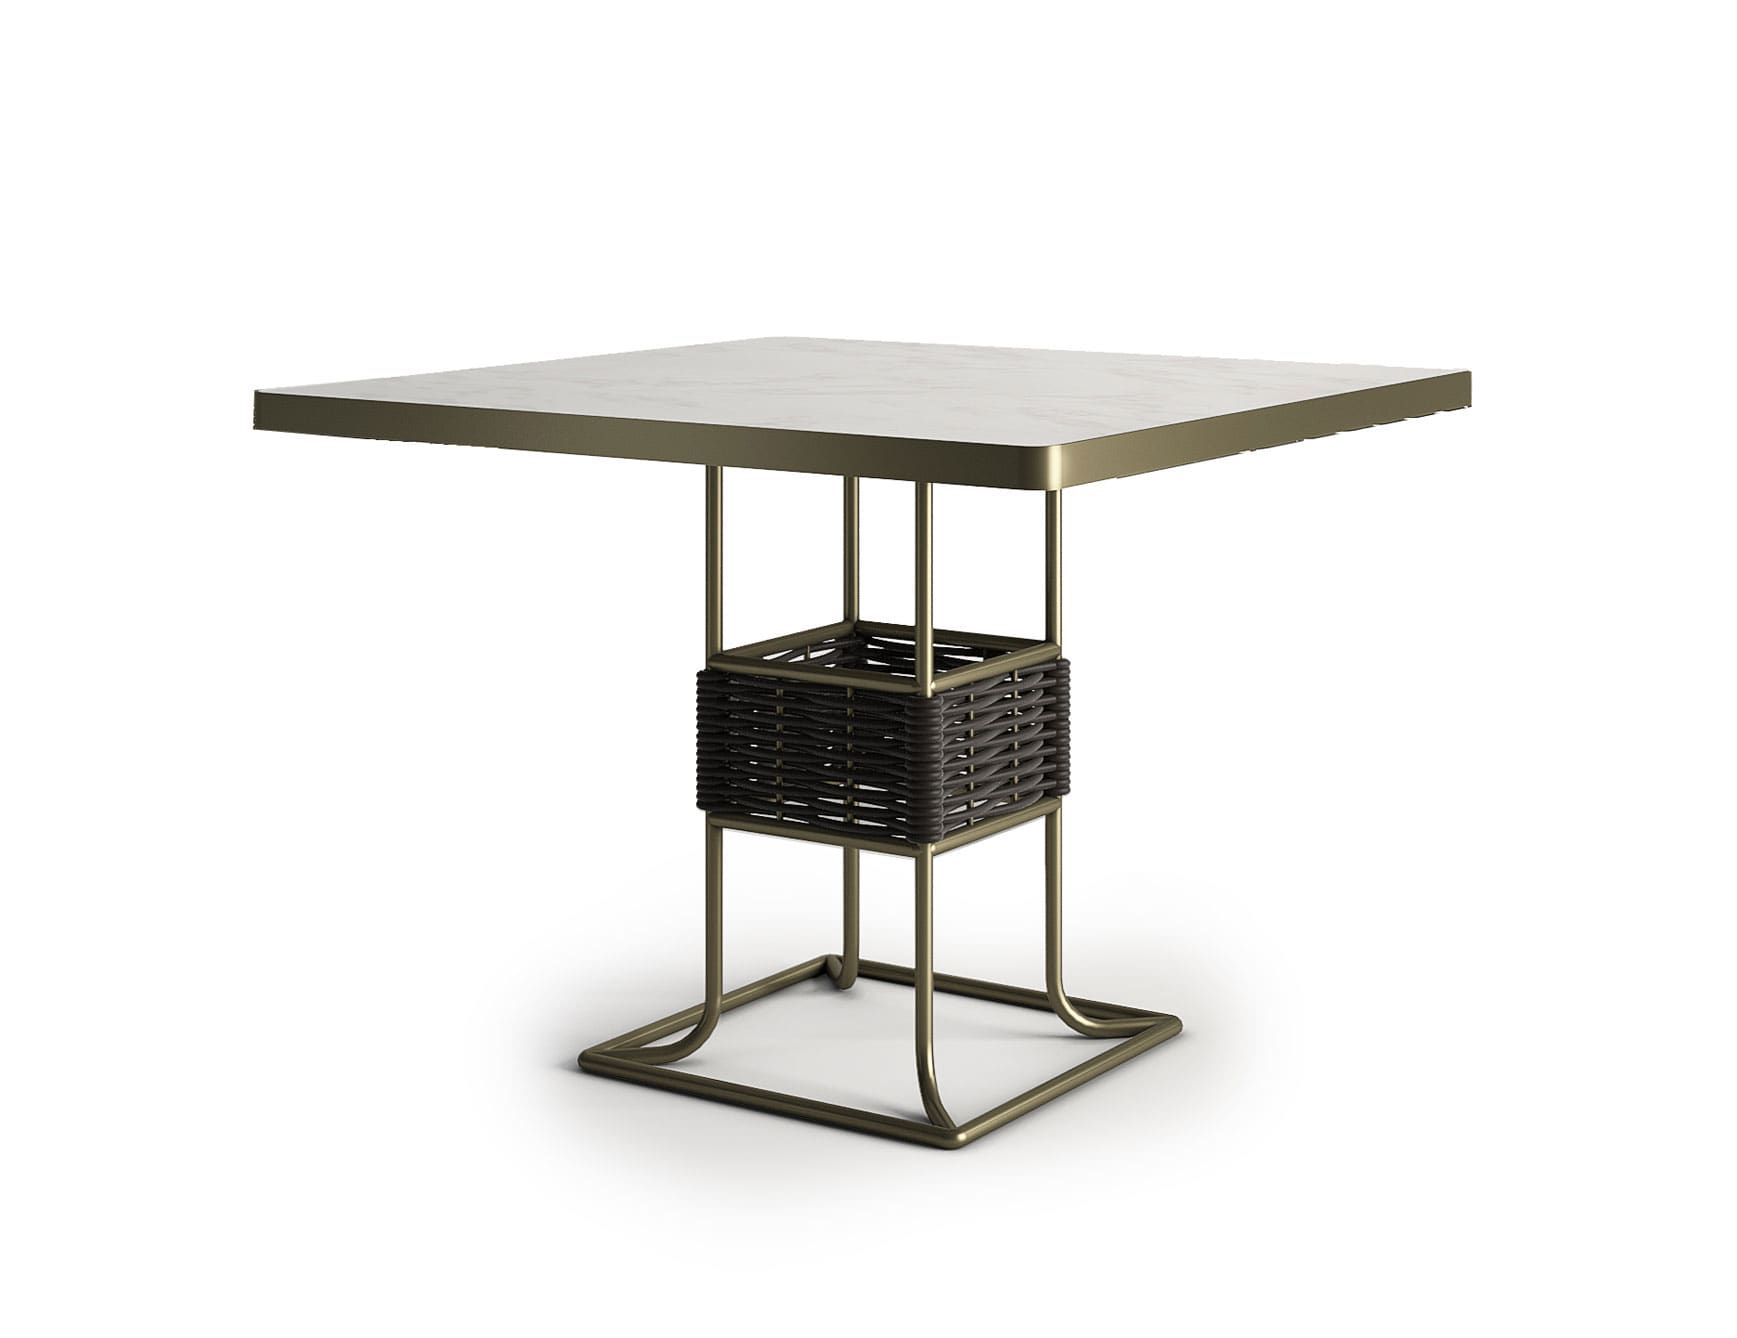 Marina Square Table modern luxury table with white Calacatta marble